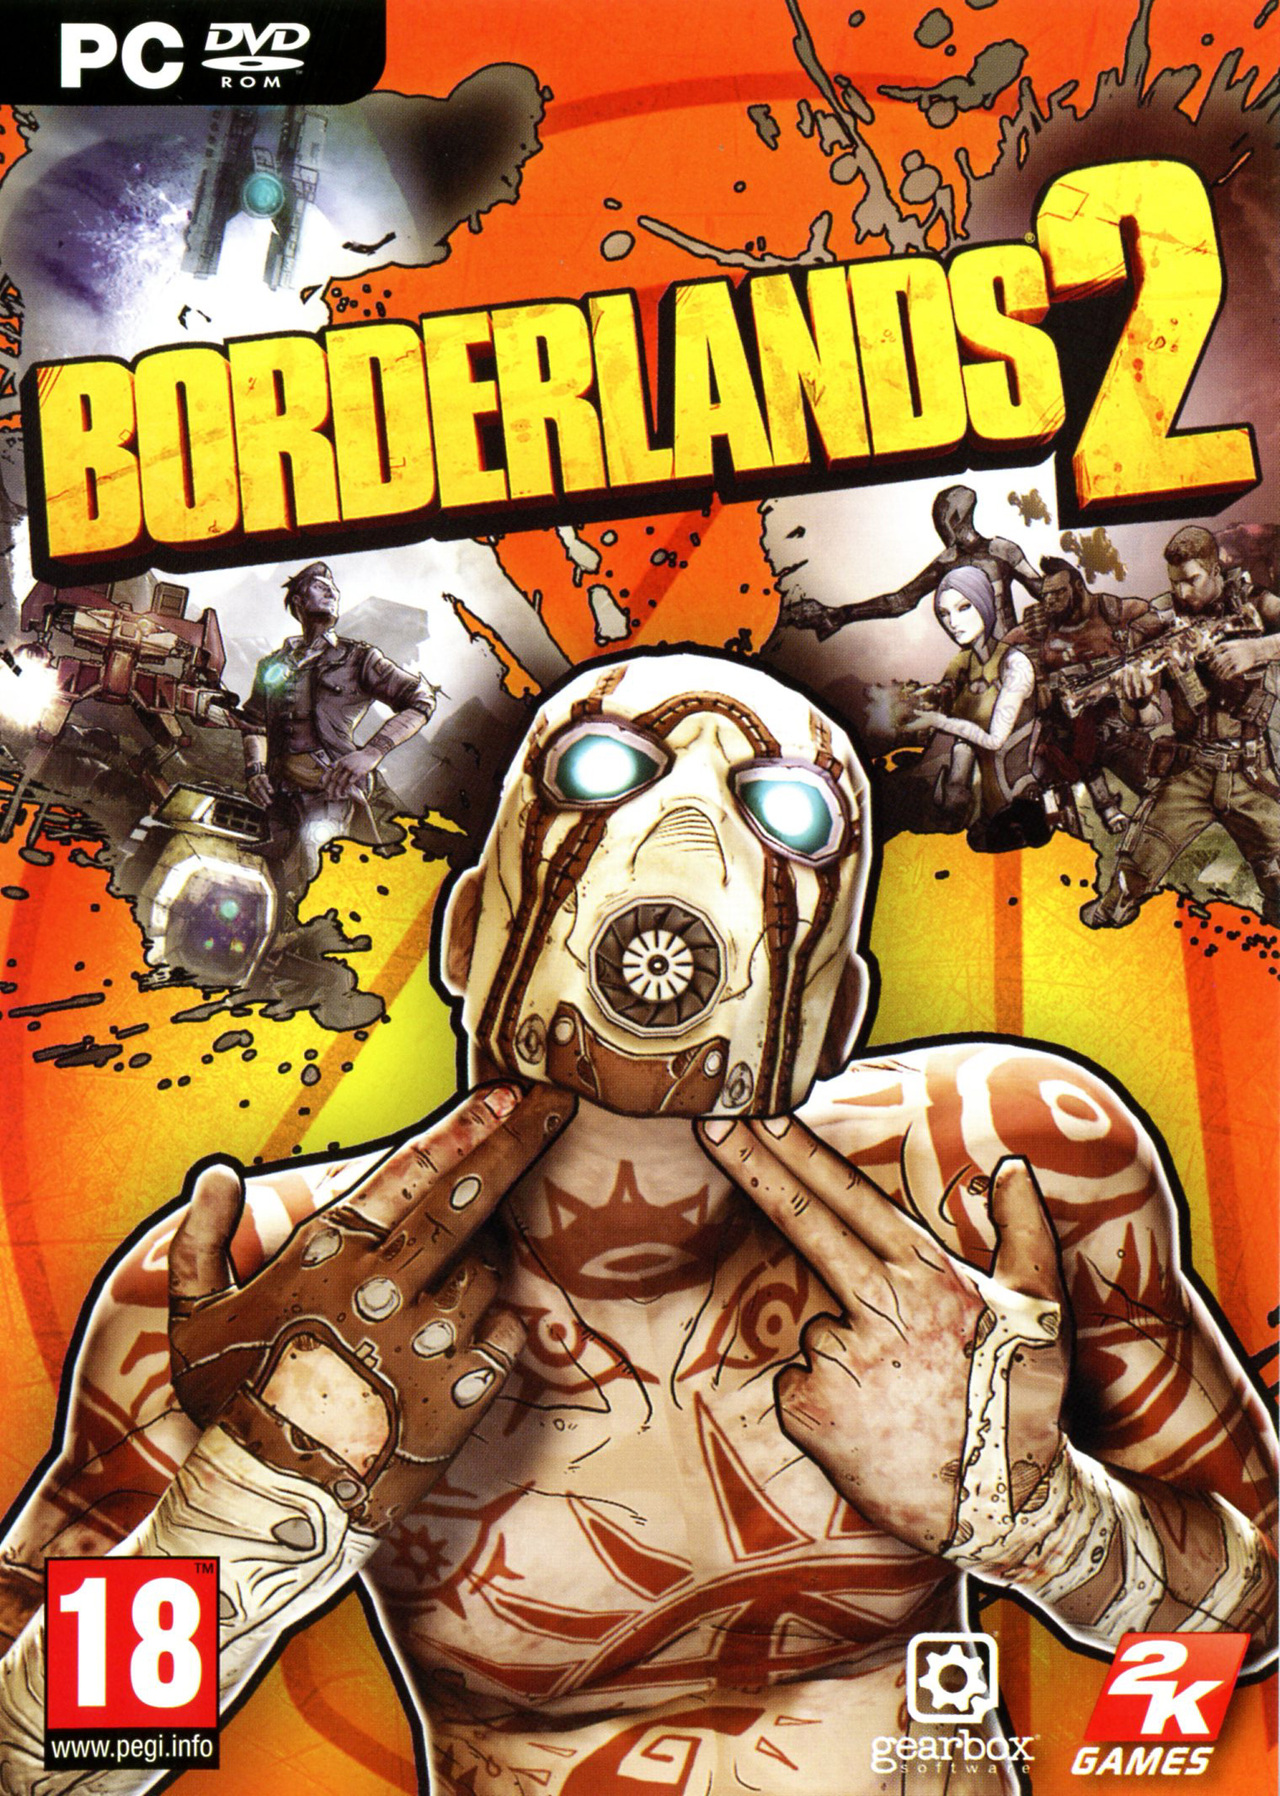 how to enable console in borderlands 2